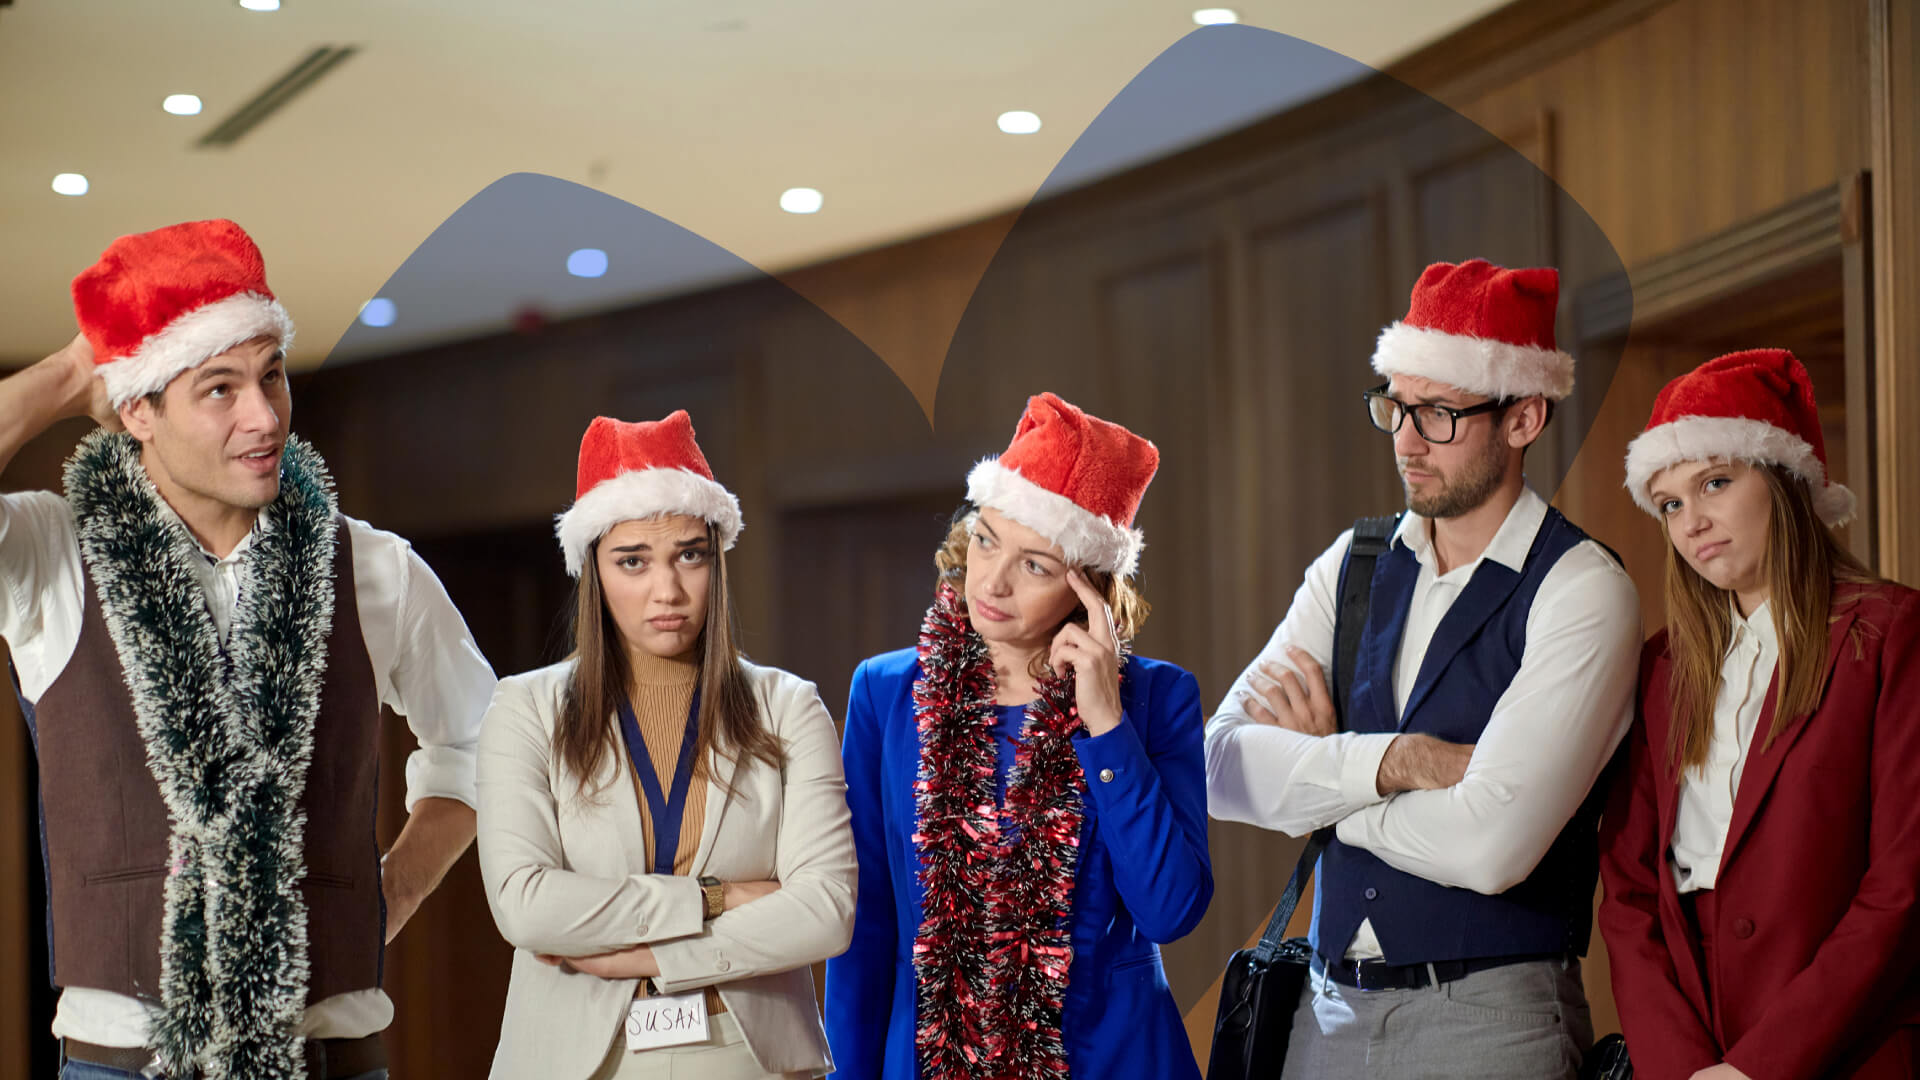 Five unhappy workers at a Christmas Party